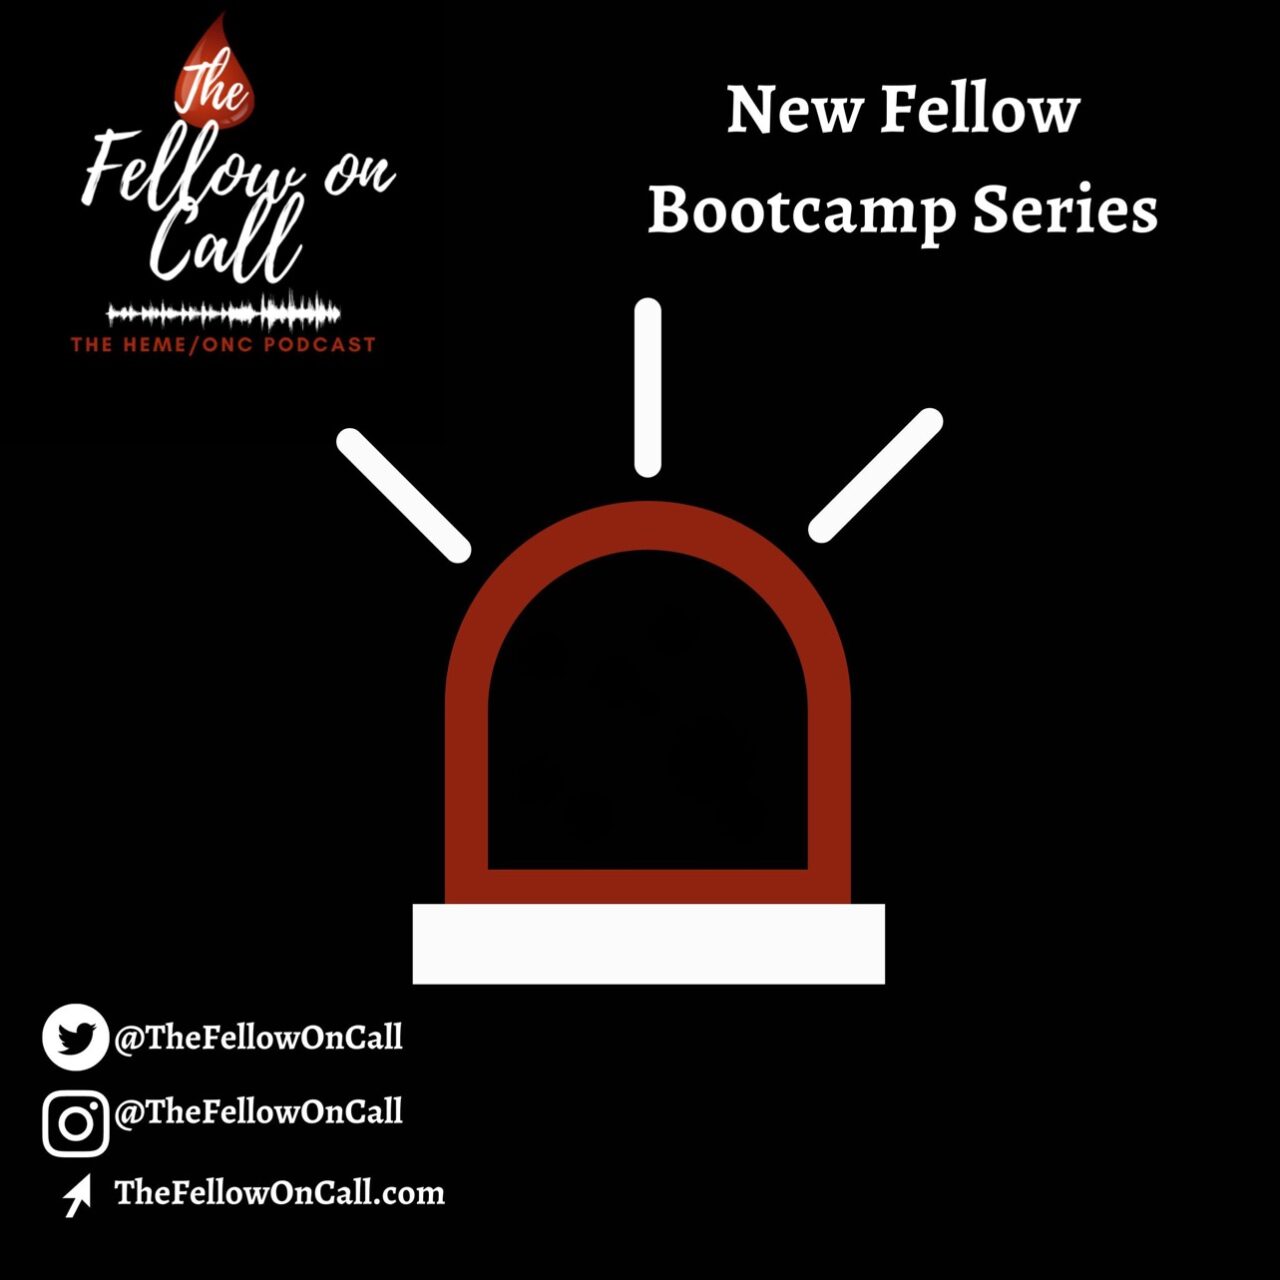 New Fellow Bootcamp Series by The Fellow On Call